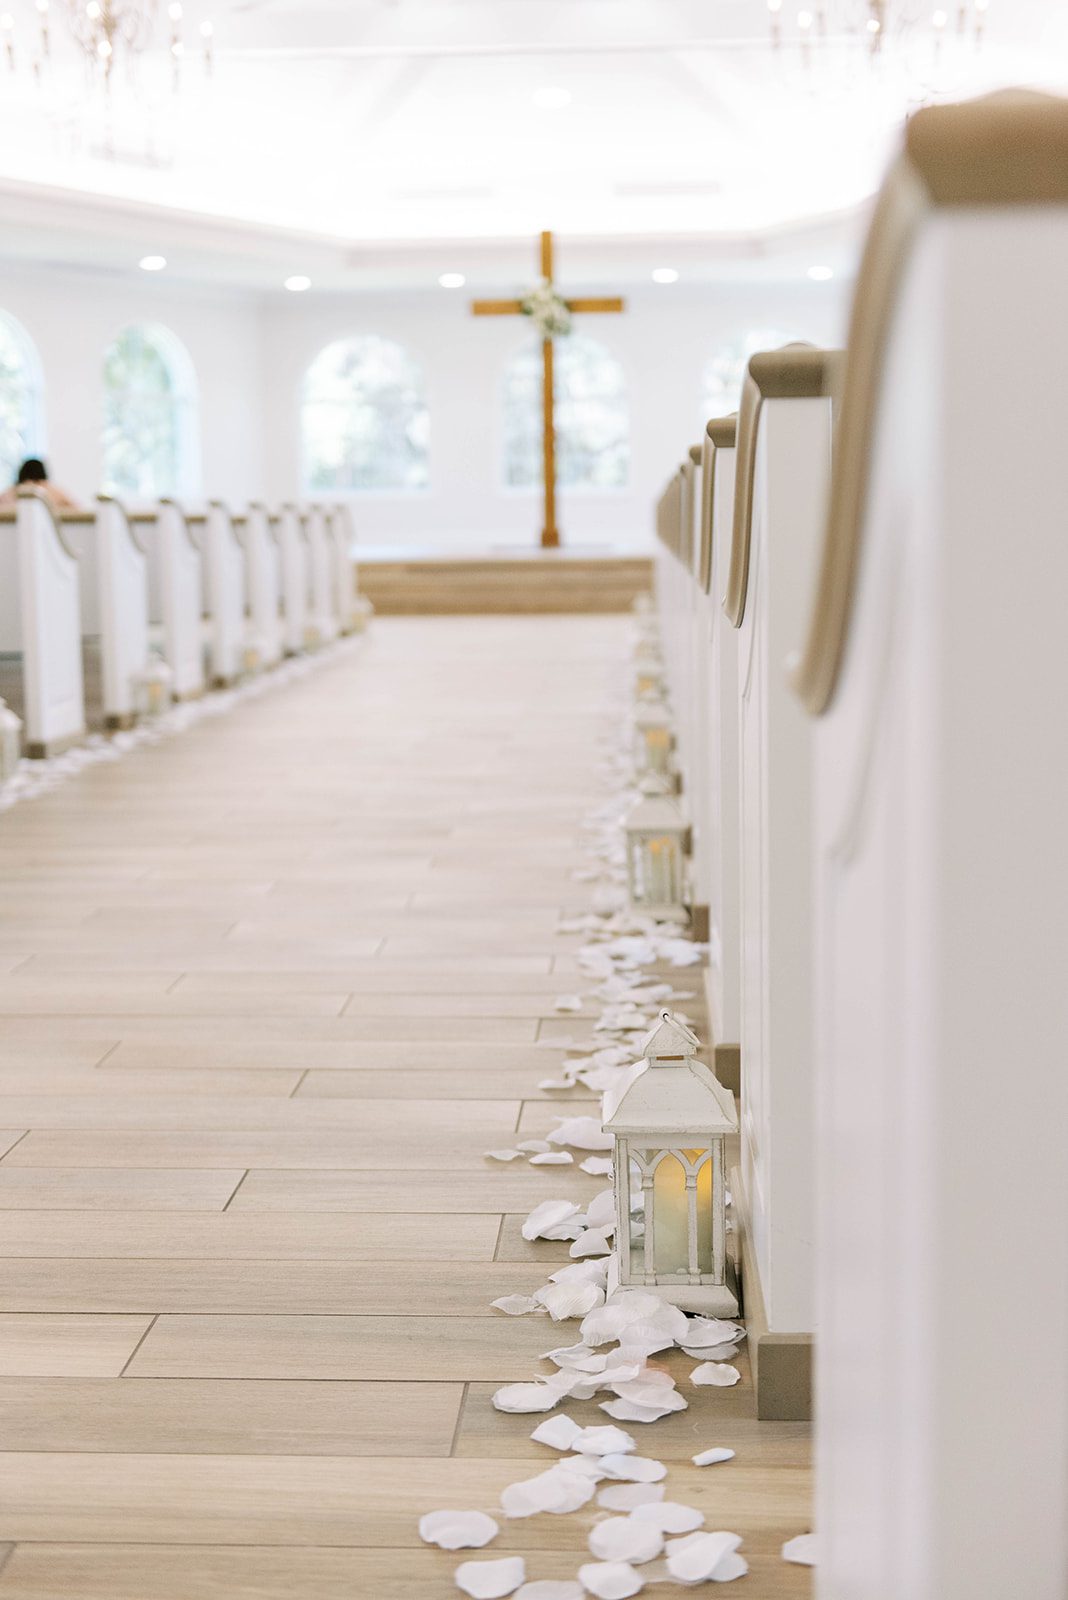 Harborside Wedding Chapel in Tampa Florida petals and stunning bright details on the floor of the venue